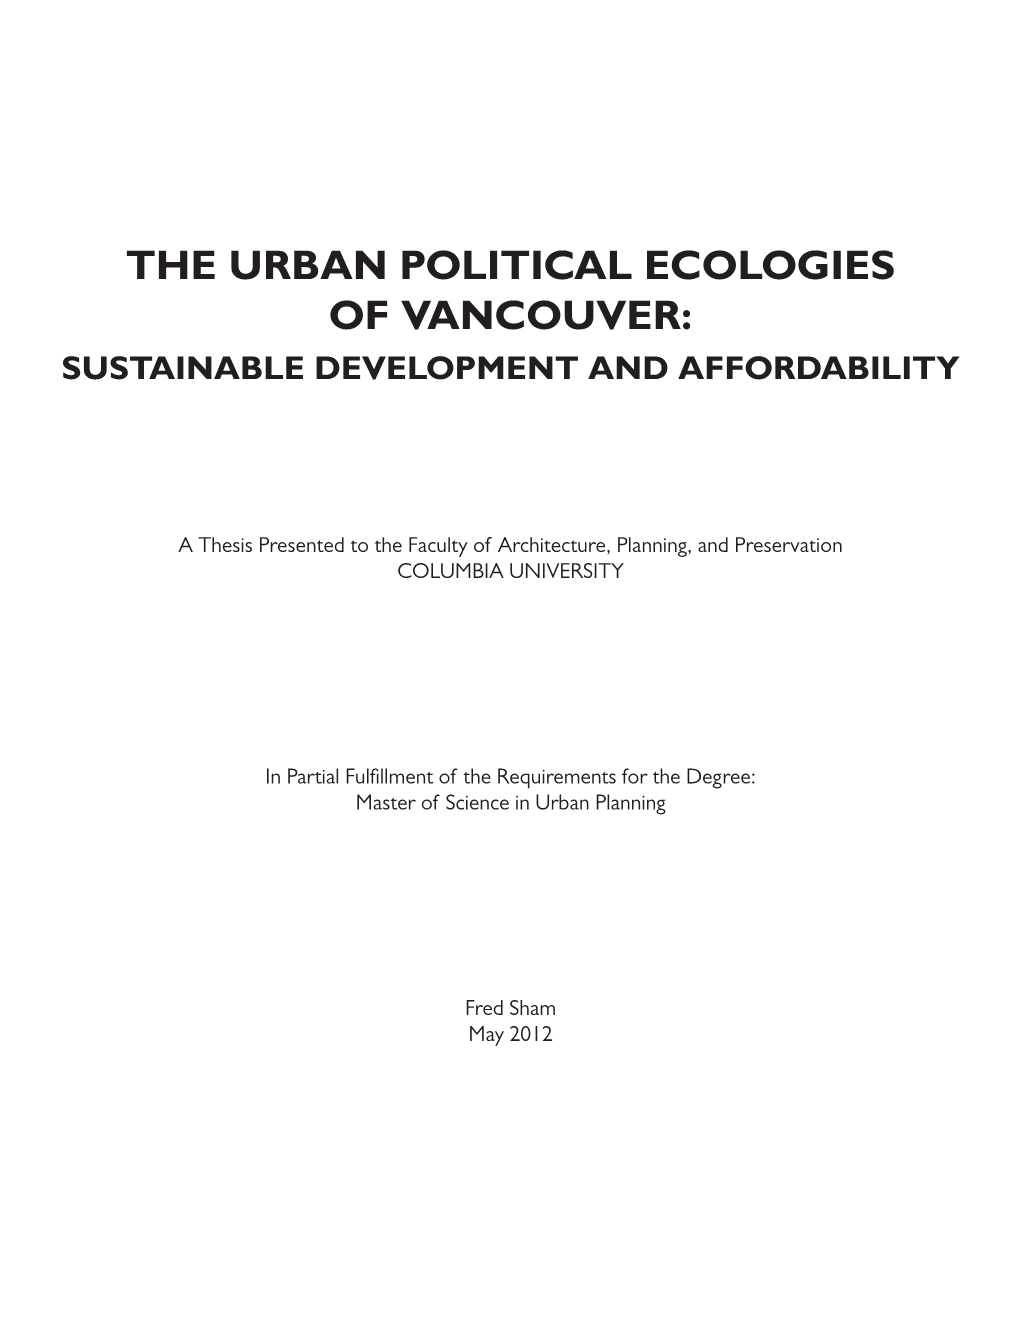 The Urban Political Ecologies of Vancouver: Sustainable Development and Affordability